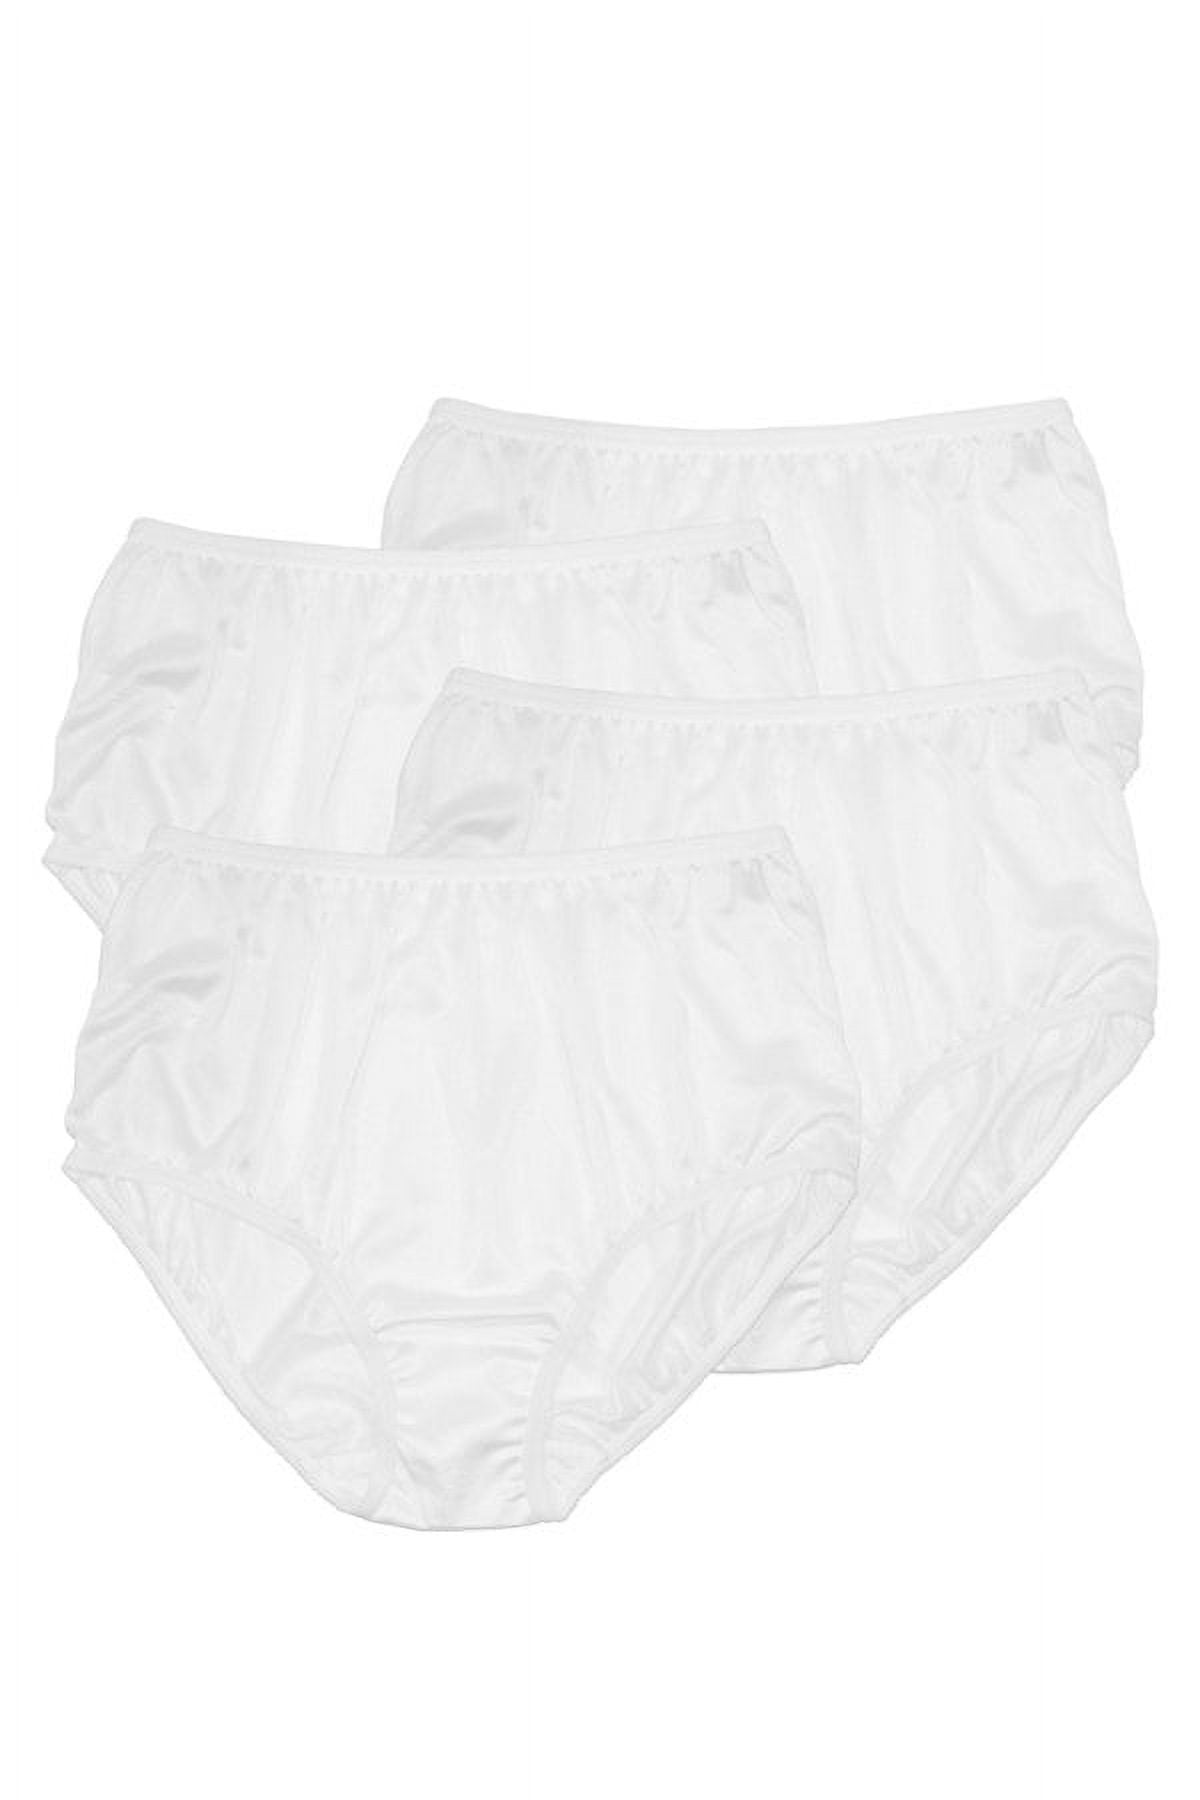 Women's Classic, Nylon, Full Coverage Brief Panty by Teri Lingerie Assorted  Colors 4 Pack